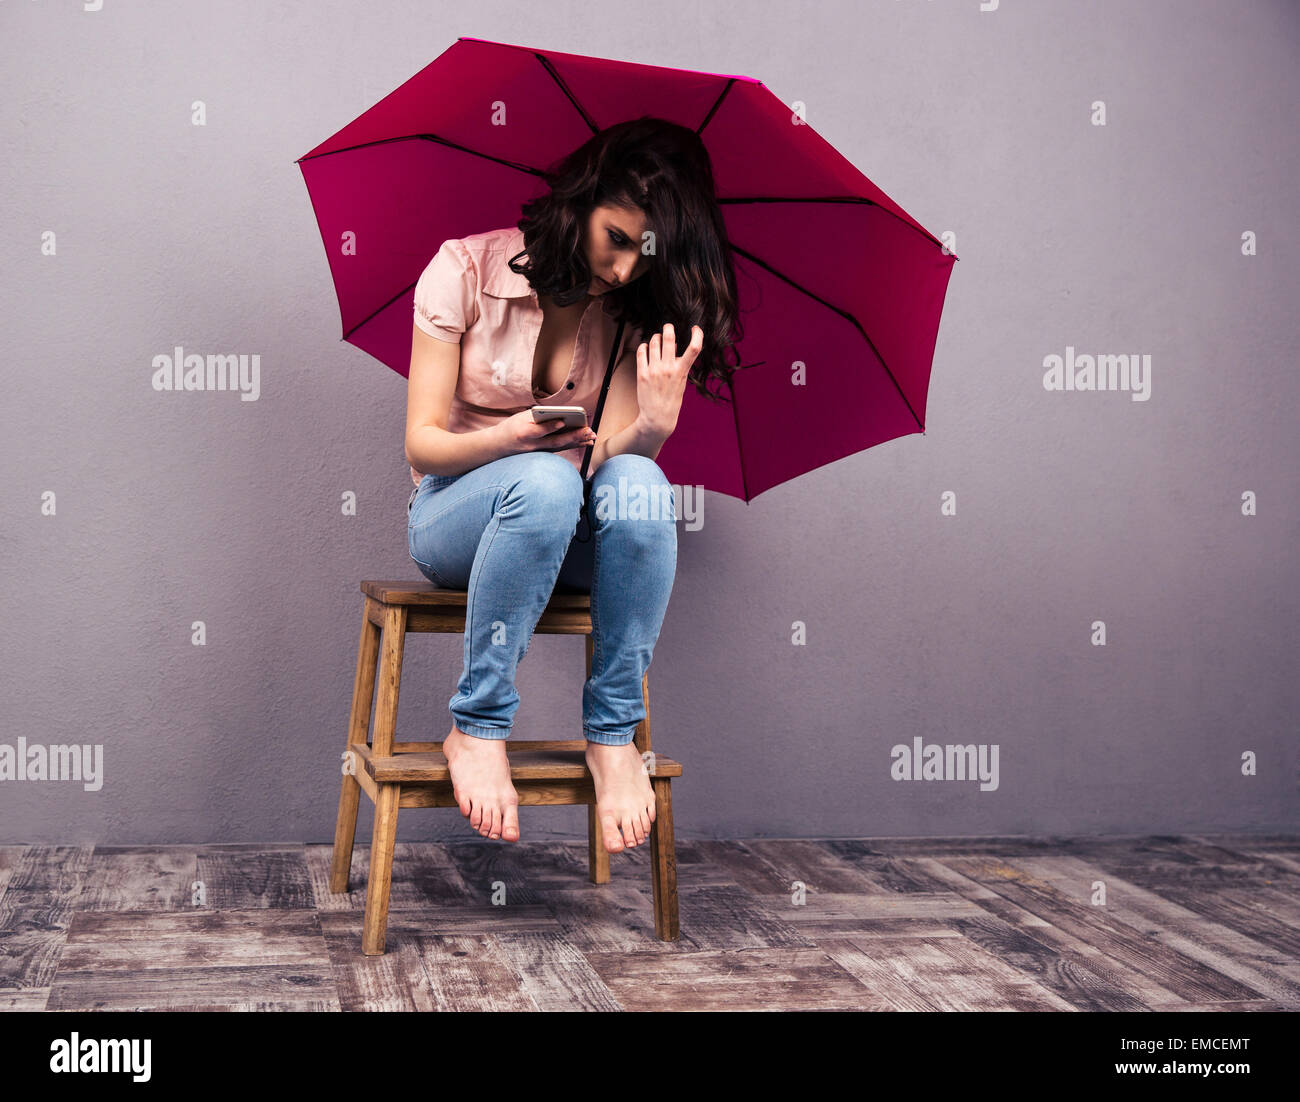 Young woman sitting on the chair with smartphone and pink umbrella. Wearing in shirt and jeans. Stock Photo